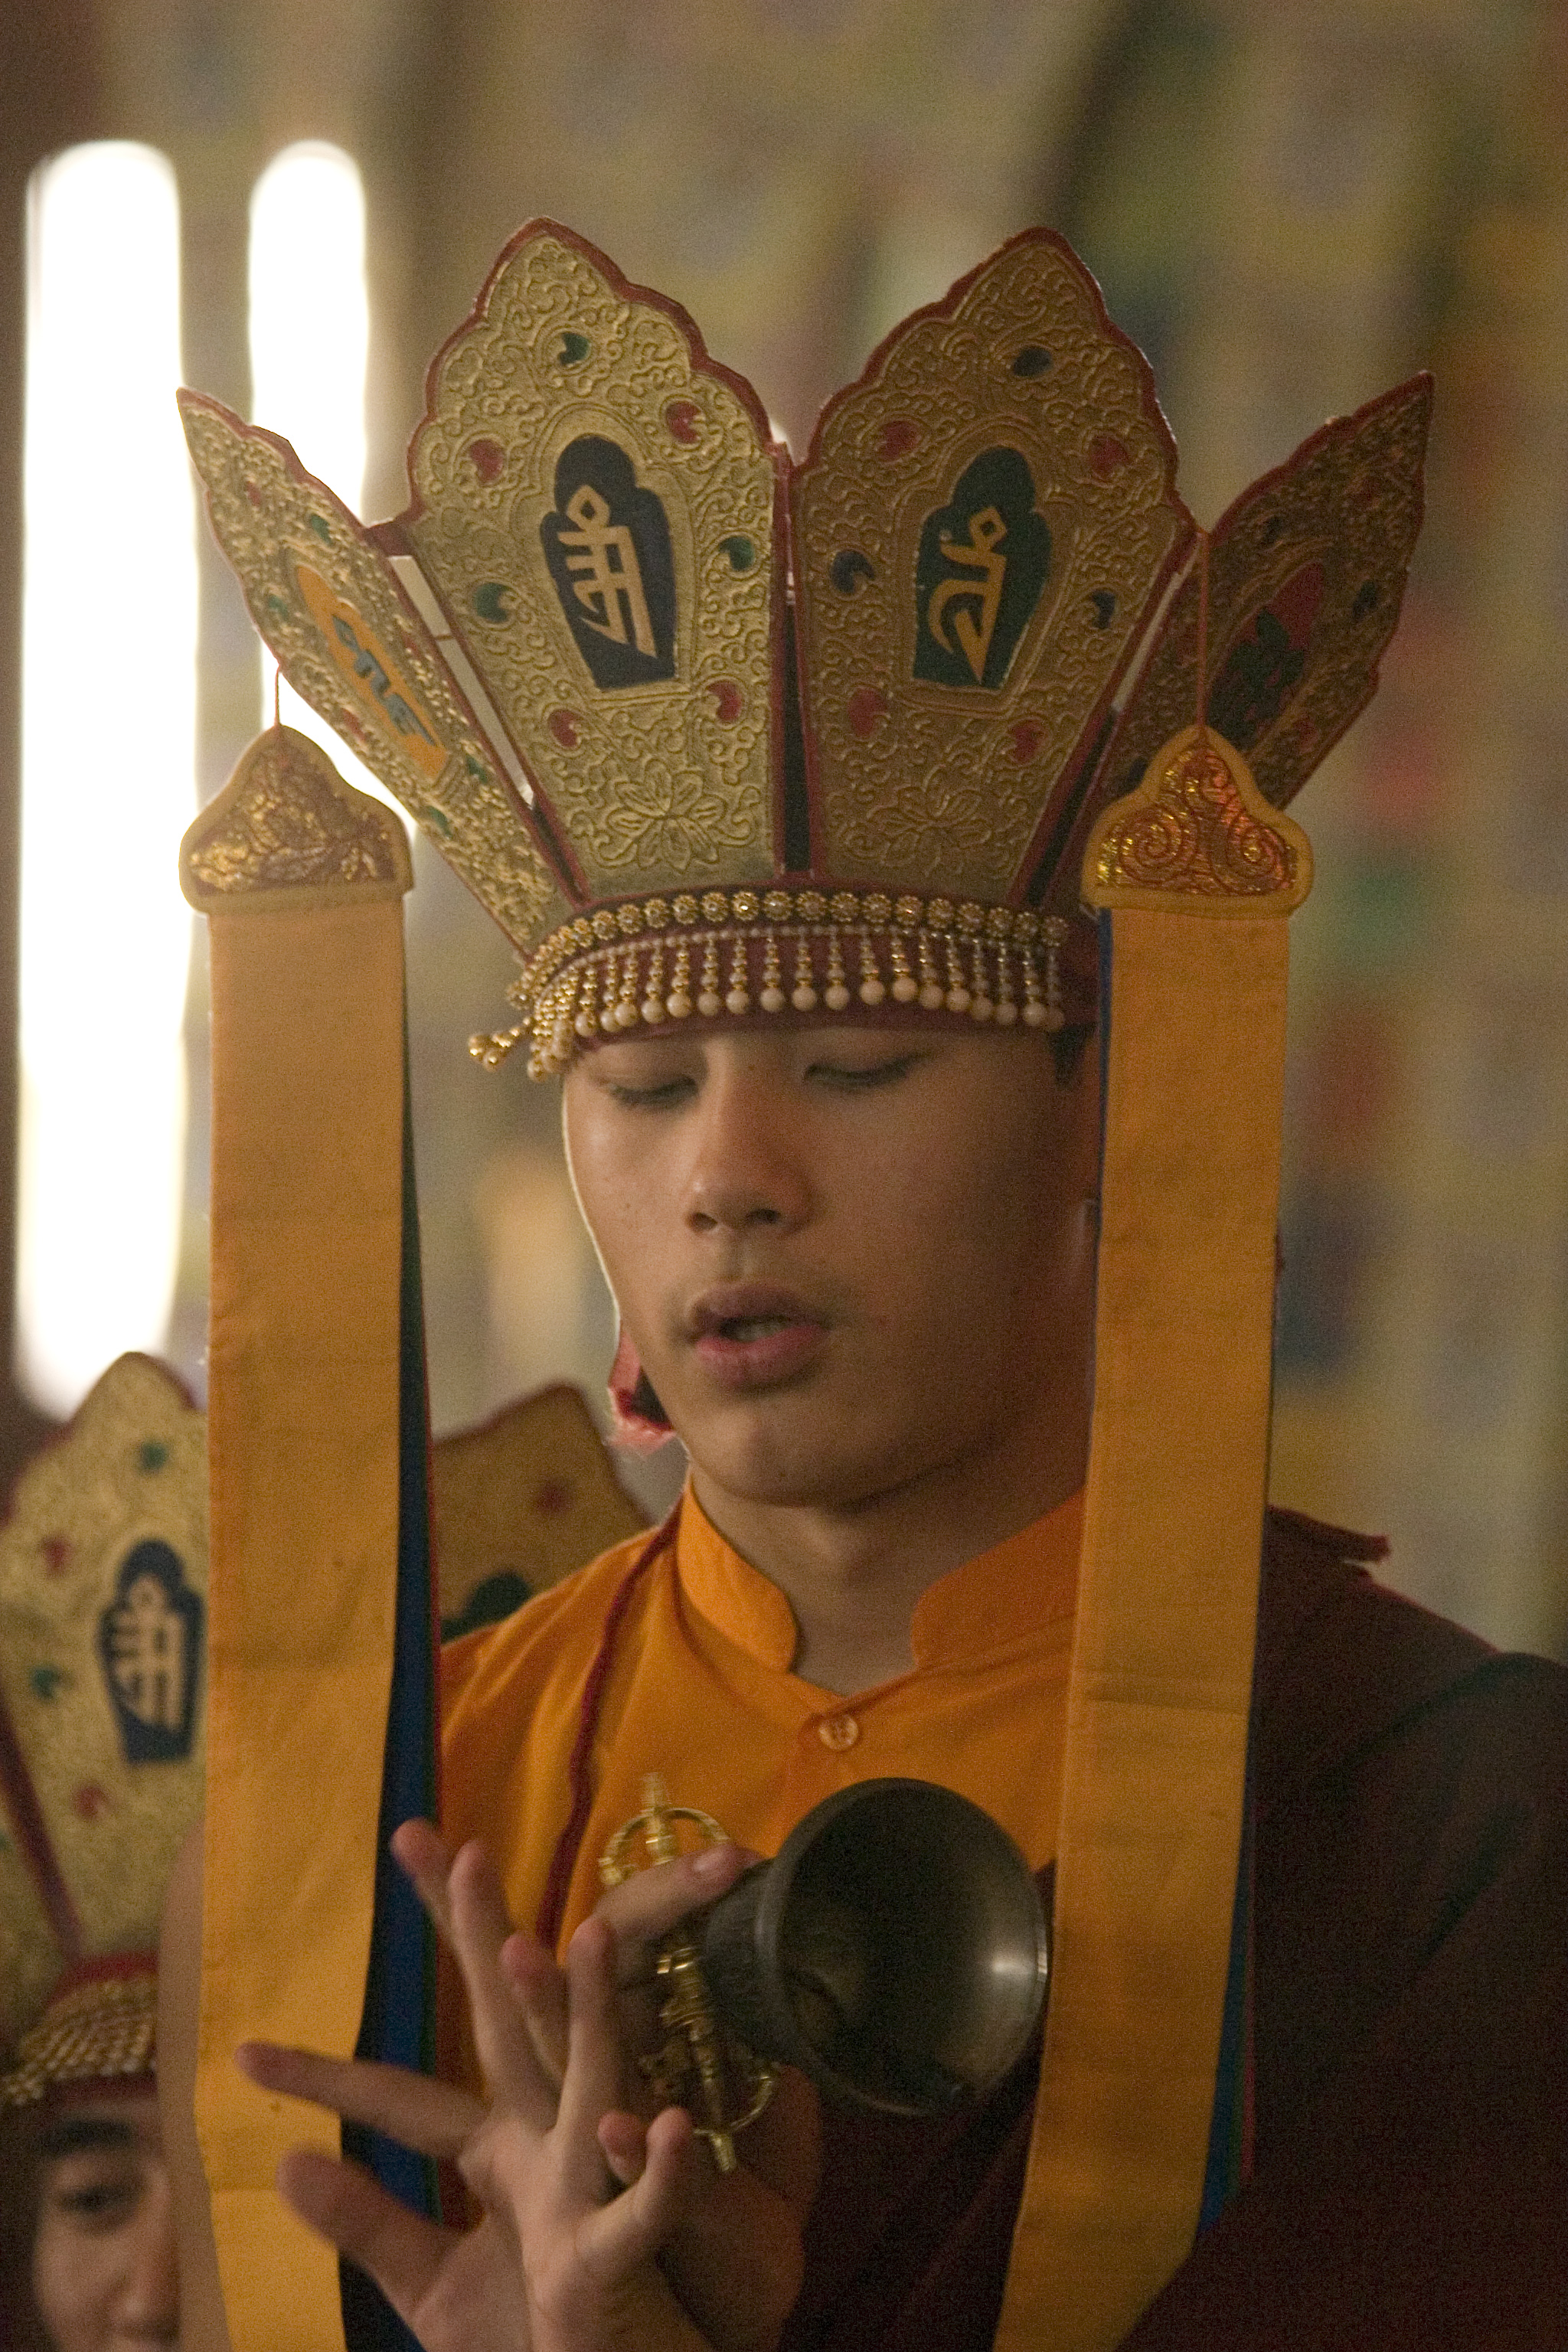 Young Tibetan lama wearing a robe and five paneled textile crown that splays outward with yellow ribbons hanging down either side.